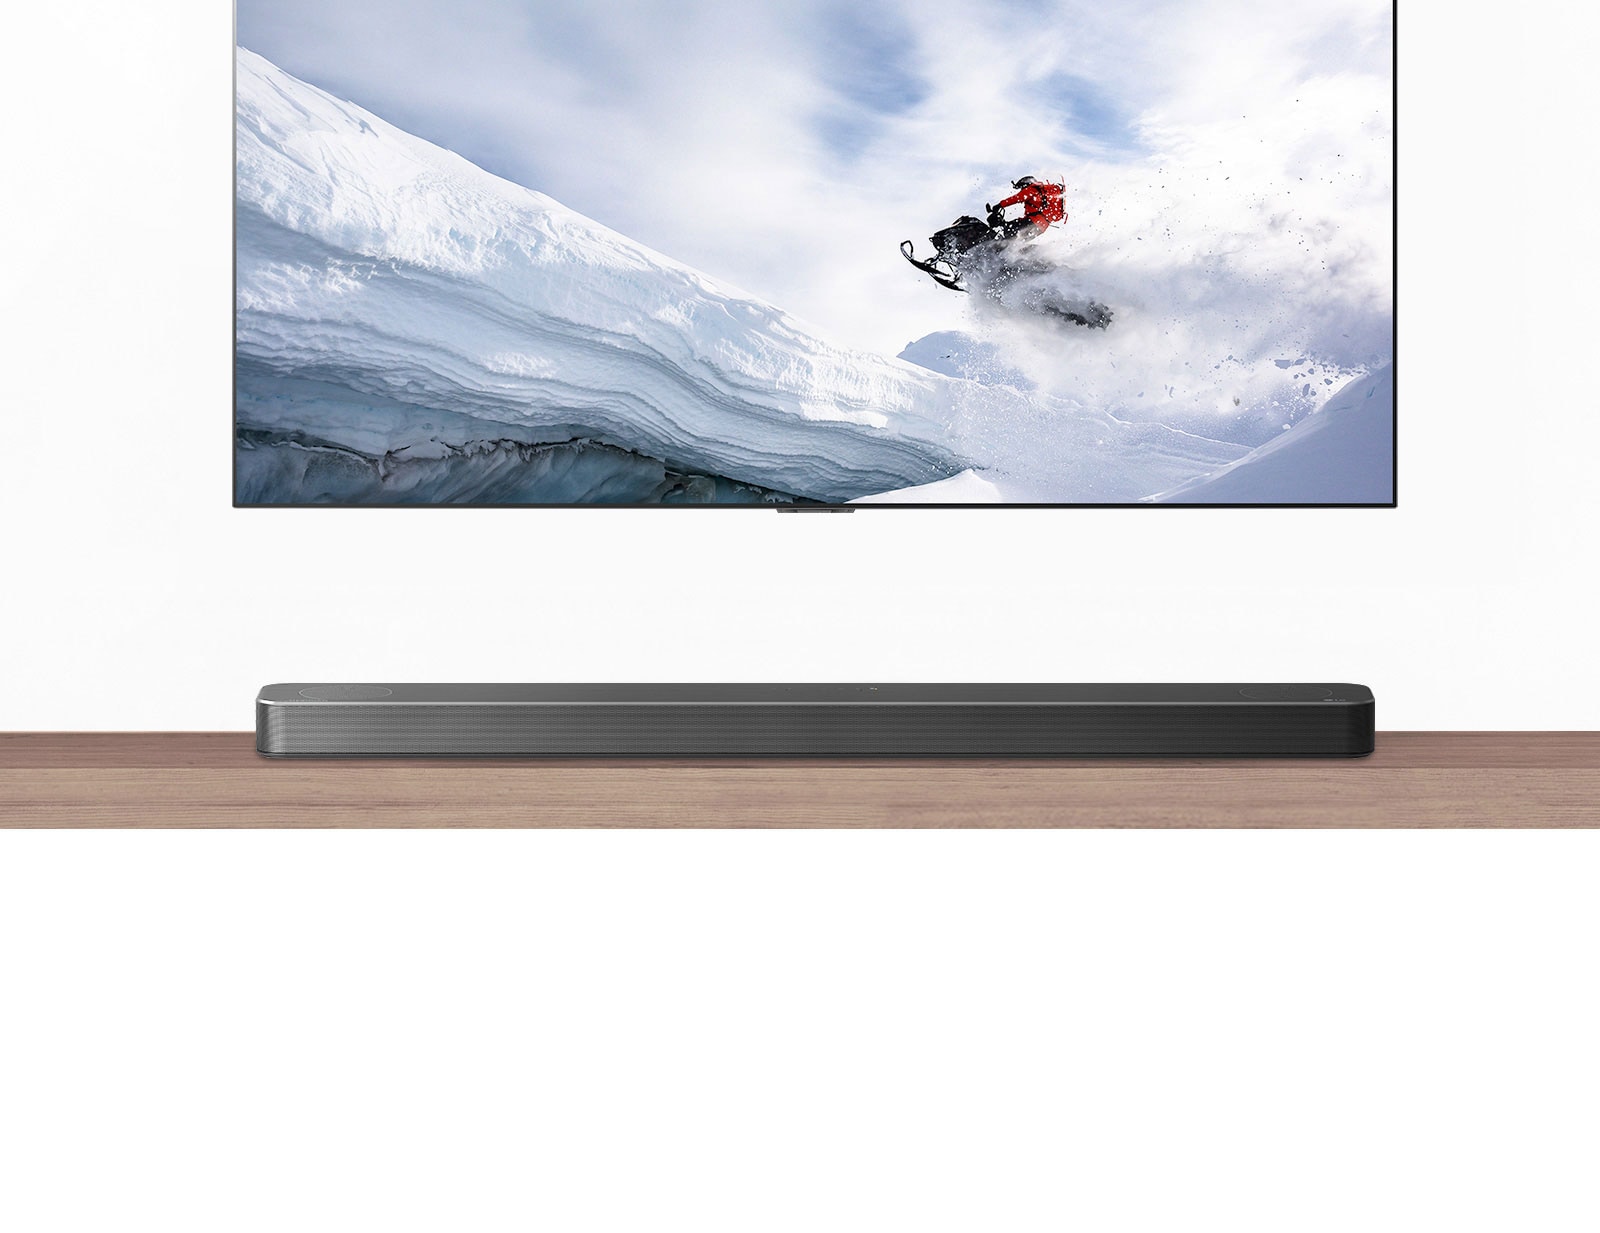 TV and Soundbar are seen from the front. TV shows man riding snowmobile in the snowy mountains. HDMI 2.1 logo is below TV.